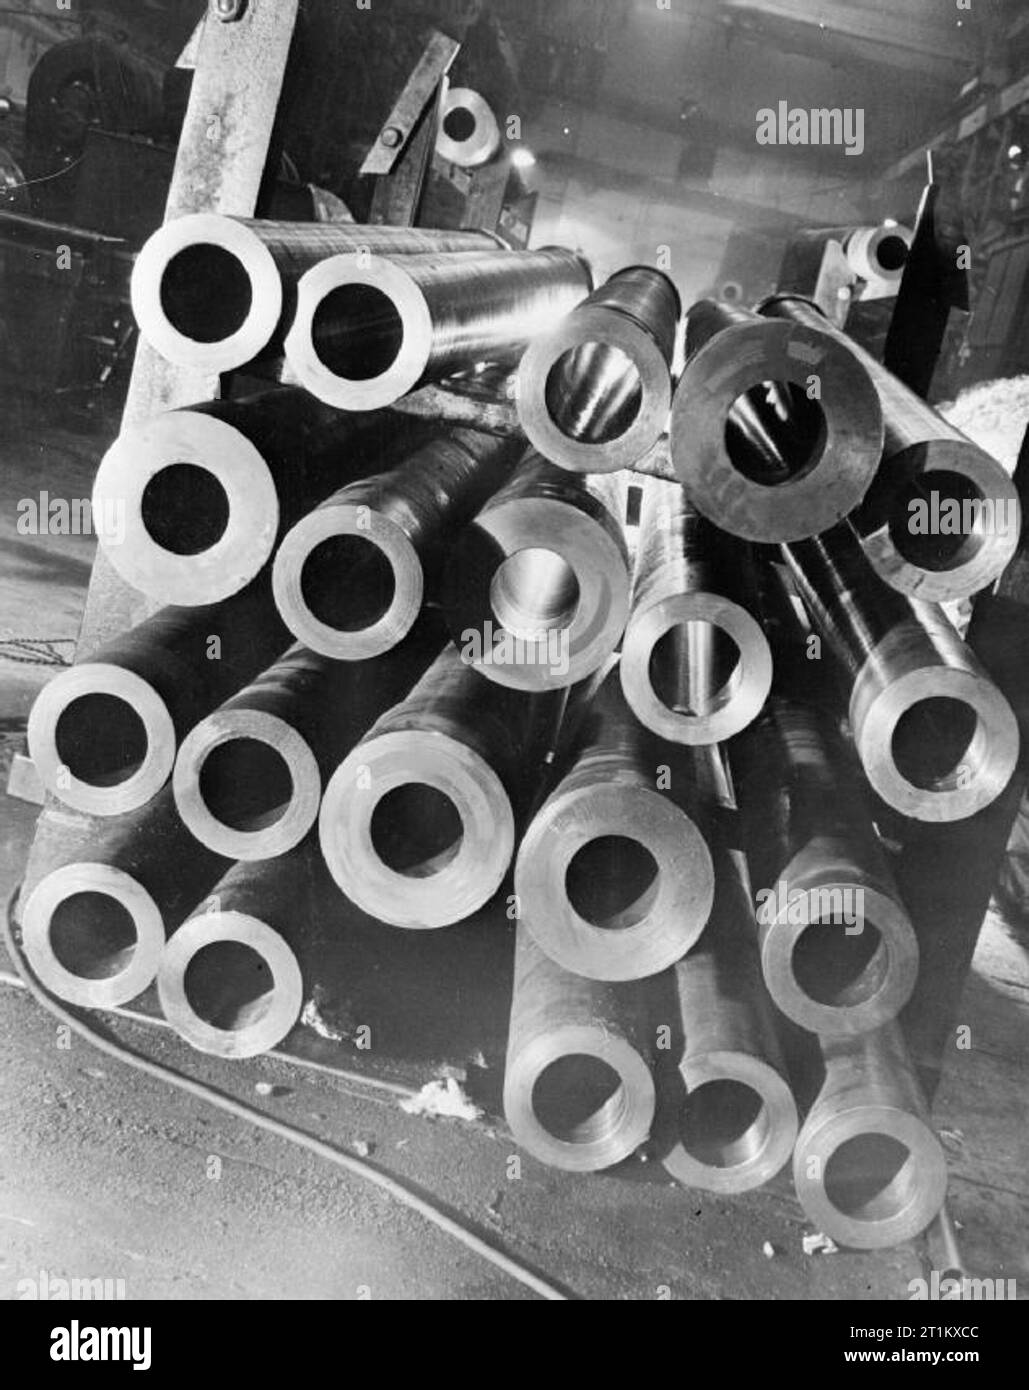 Birth of a Gun- the Production of a 25 Pounder Field Gun, 1942 A pile of 25 pounder field gun barrels await rifling and further work at this factory, somewhere in Britain. Stock Photo